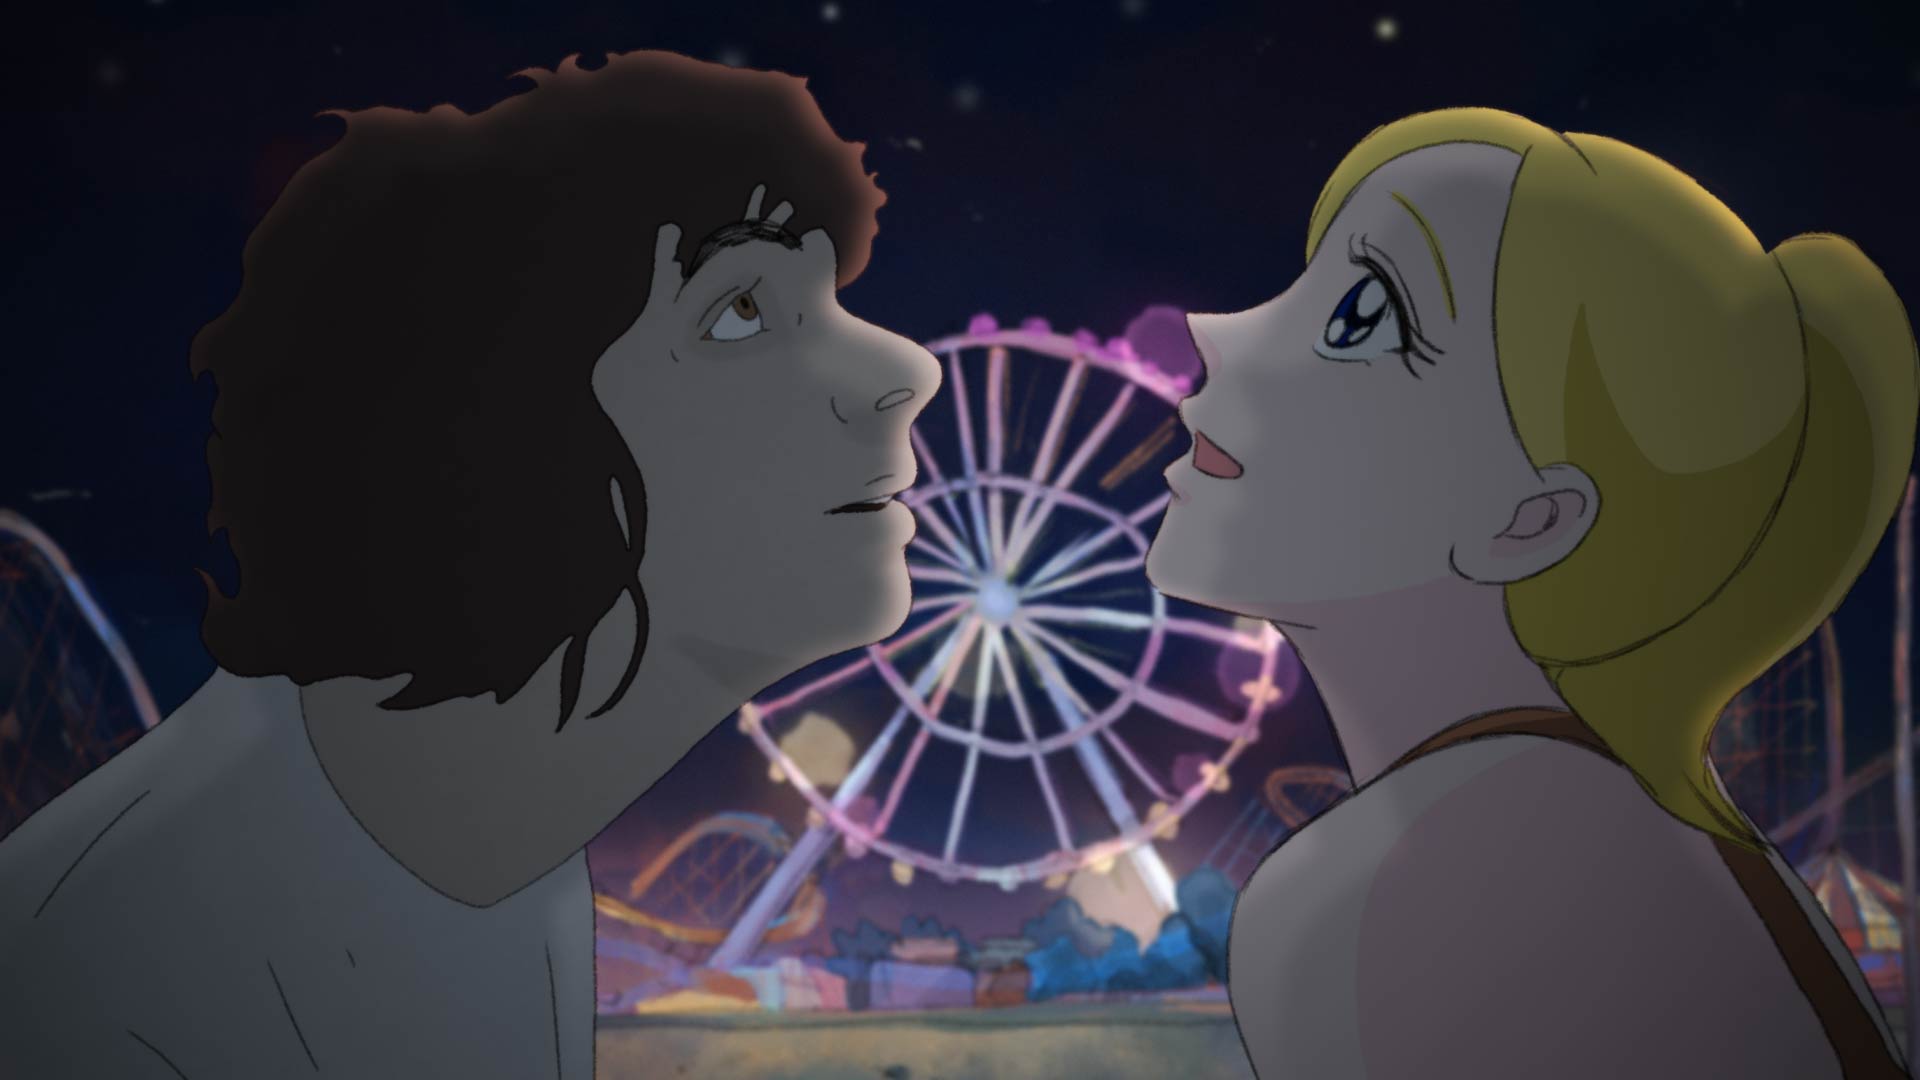 A still from the animation showing the faces of a boy and girl in front of a Ferris wheel